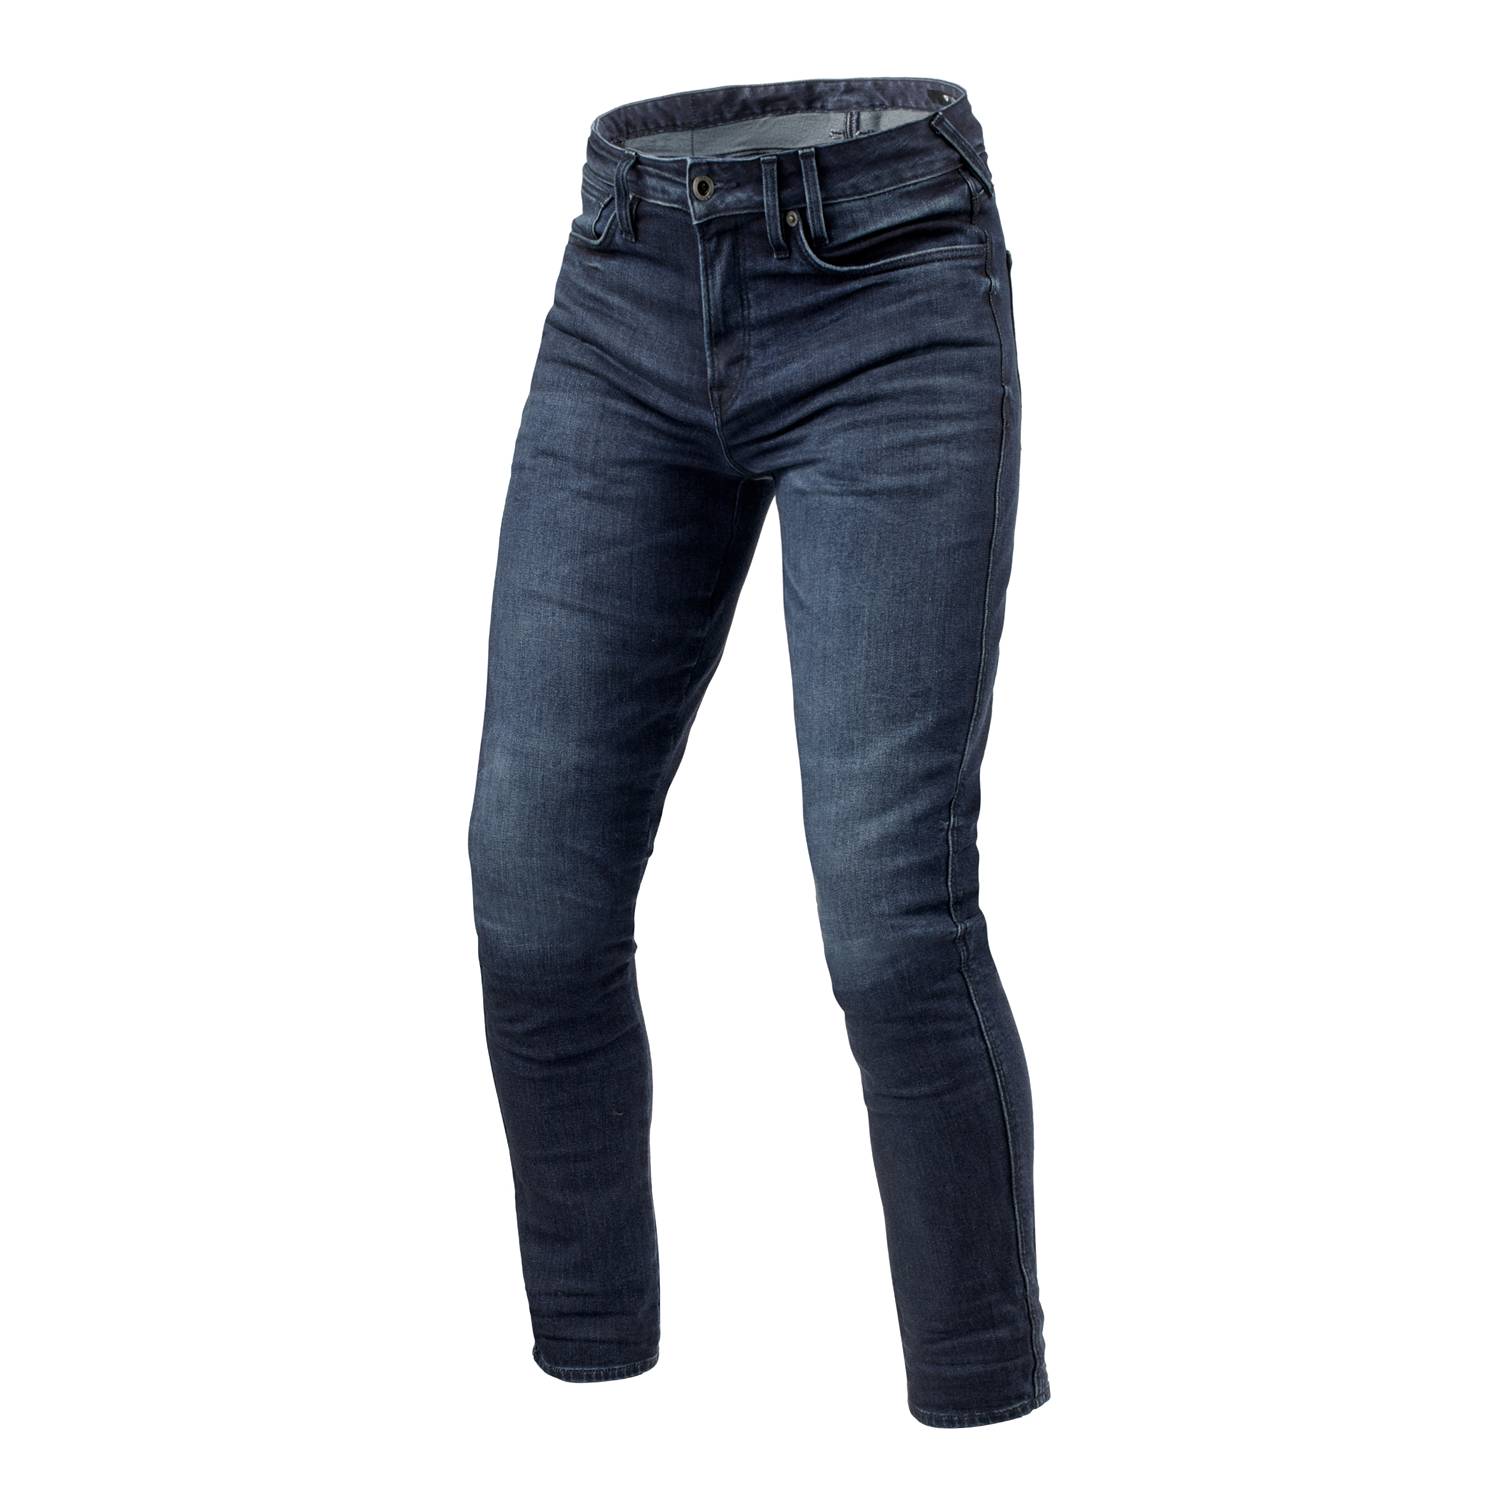 Image of REV'IT! Jeans Carlin SK Dark Blue Used L32 Motorcycle Jeans Size L32/W33 ID 8700001376495